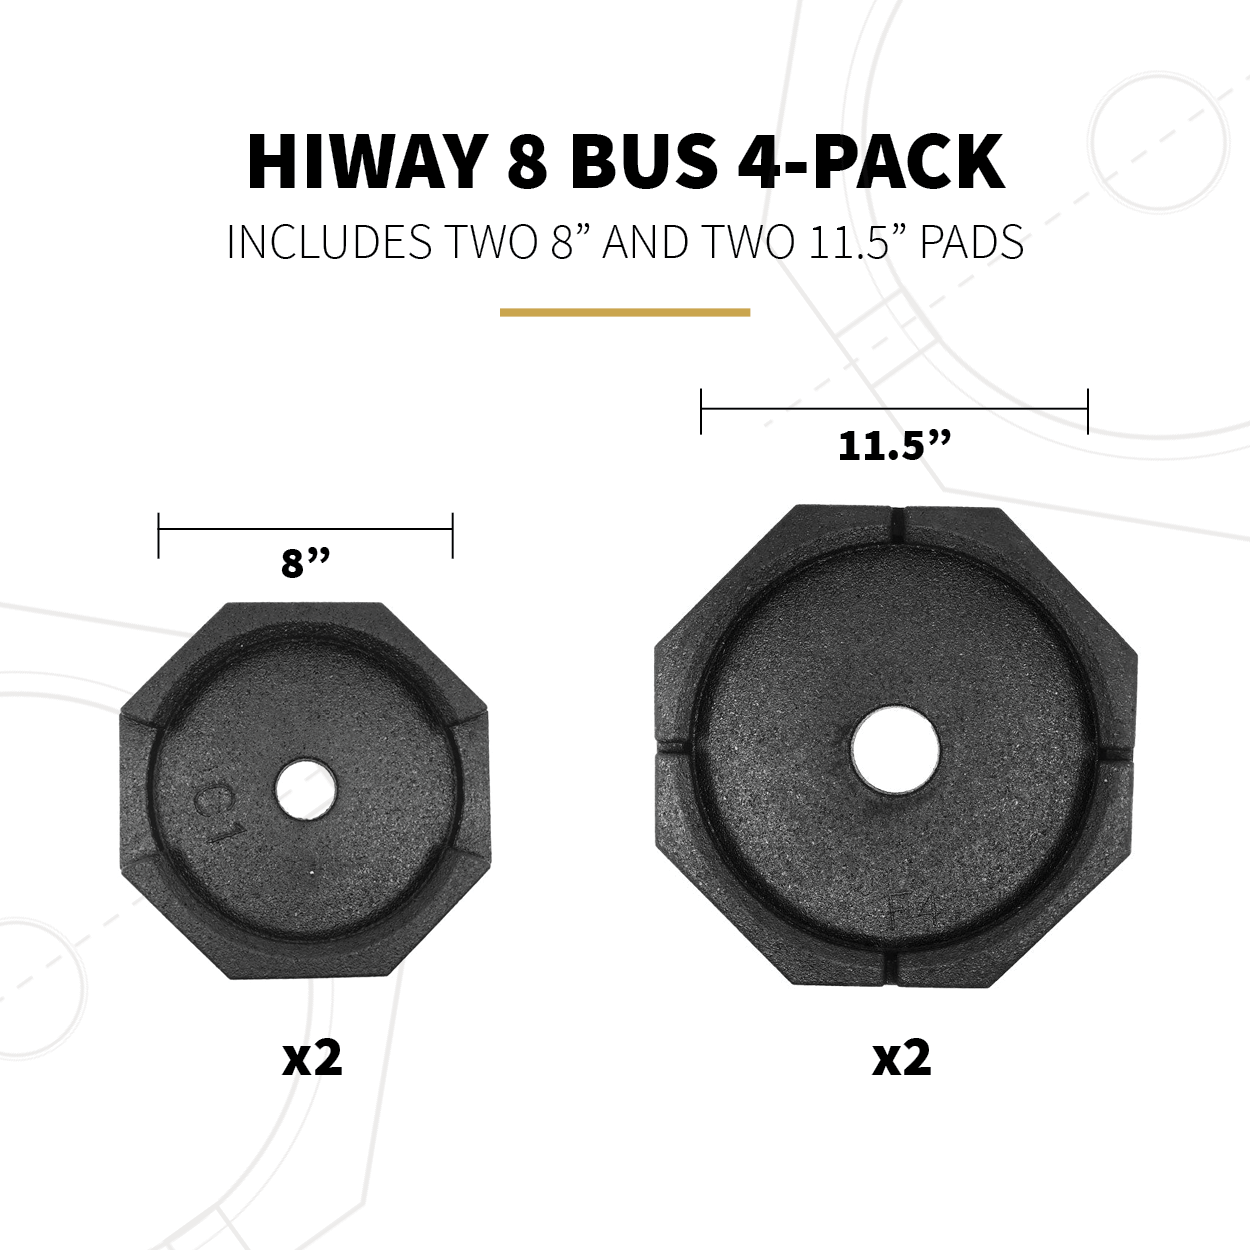 HiWay 8 Bus 4-Pack Specs